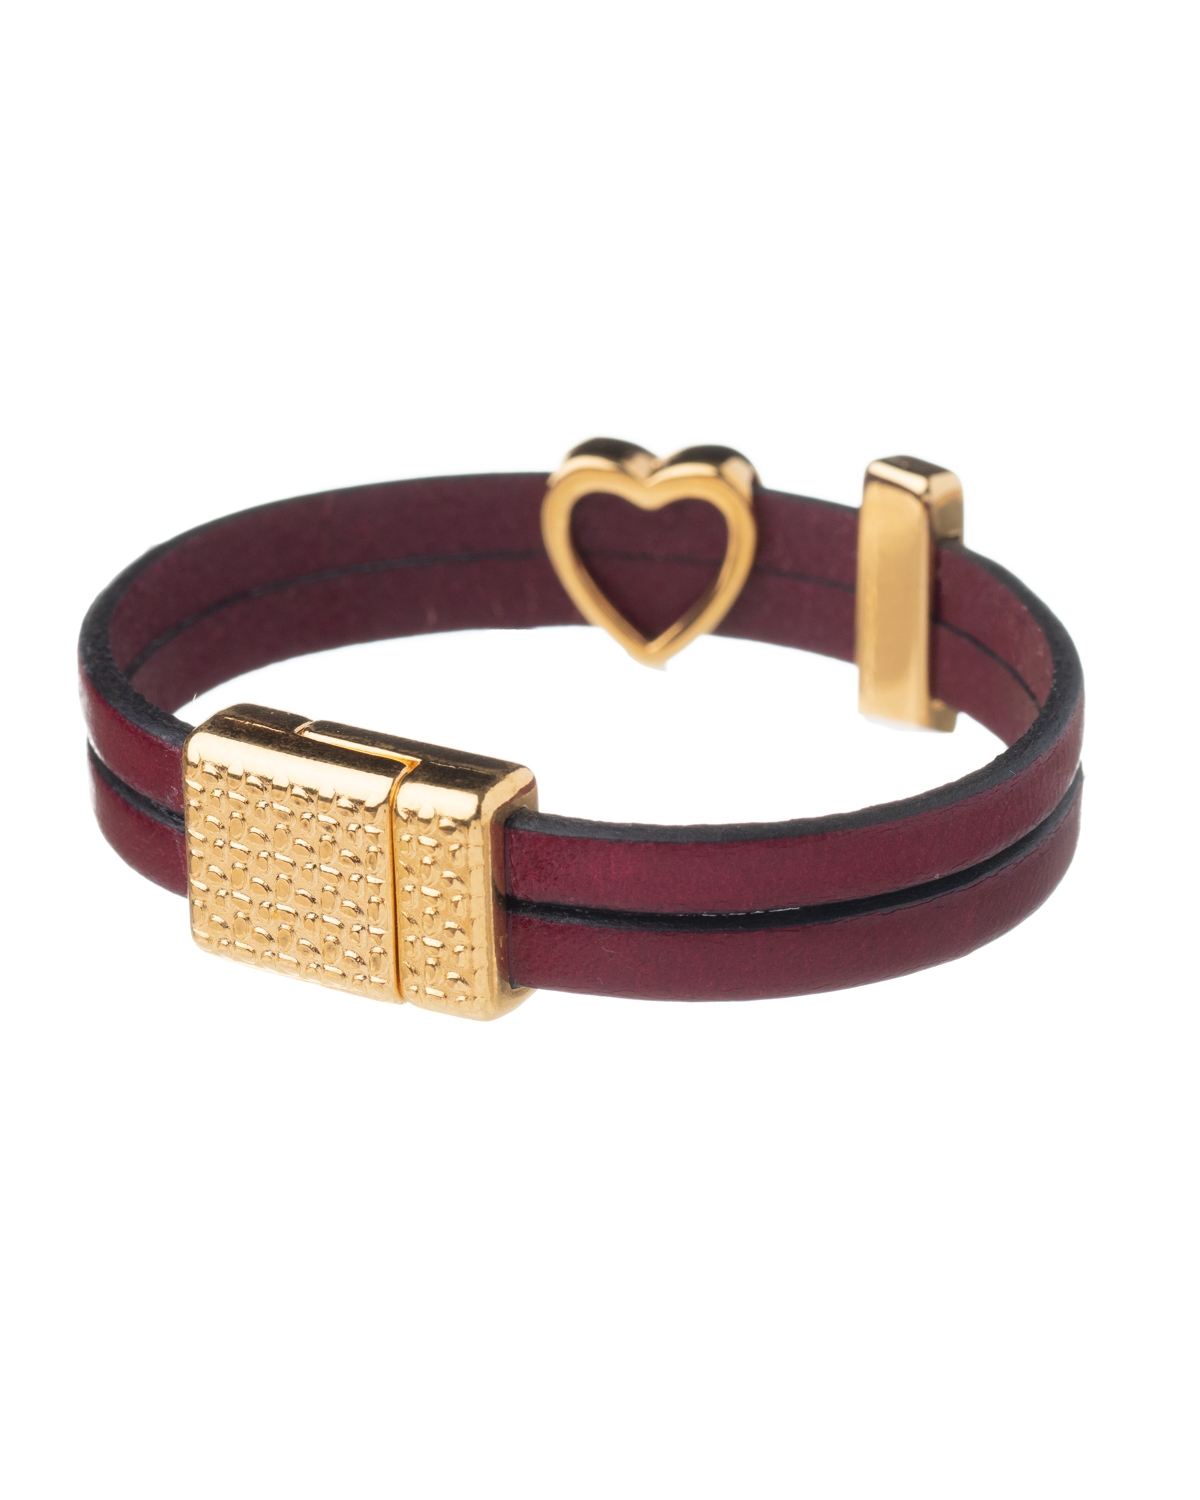 Love and Heart leather Bracelet close